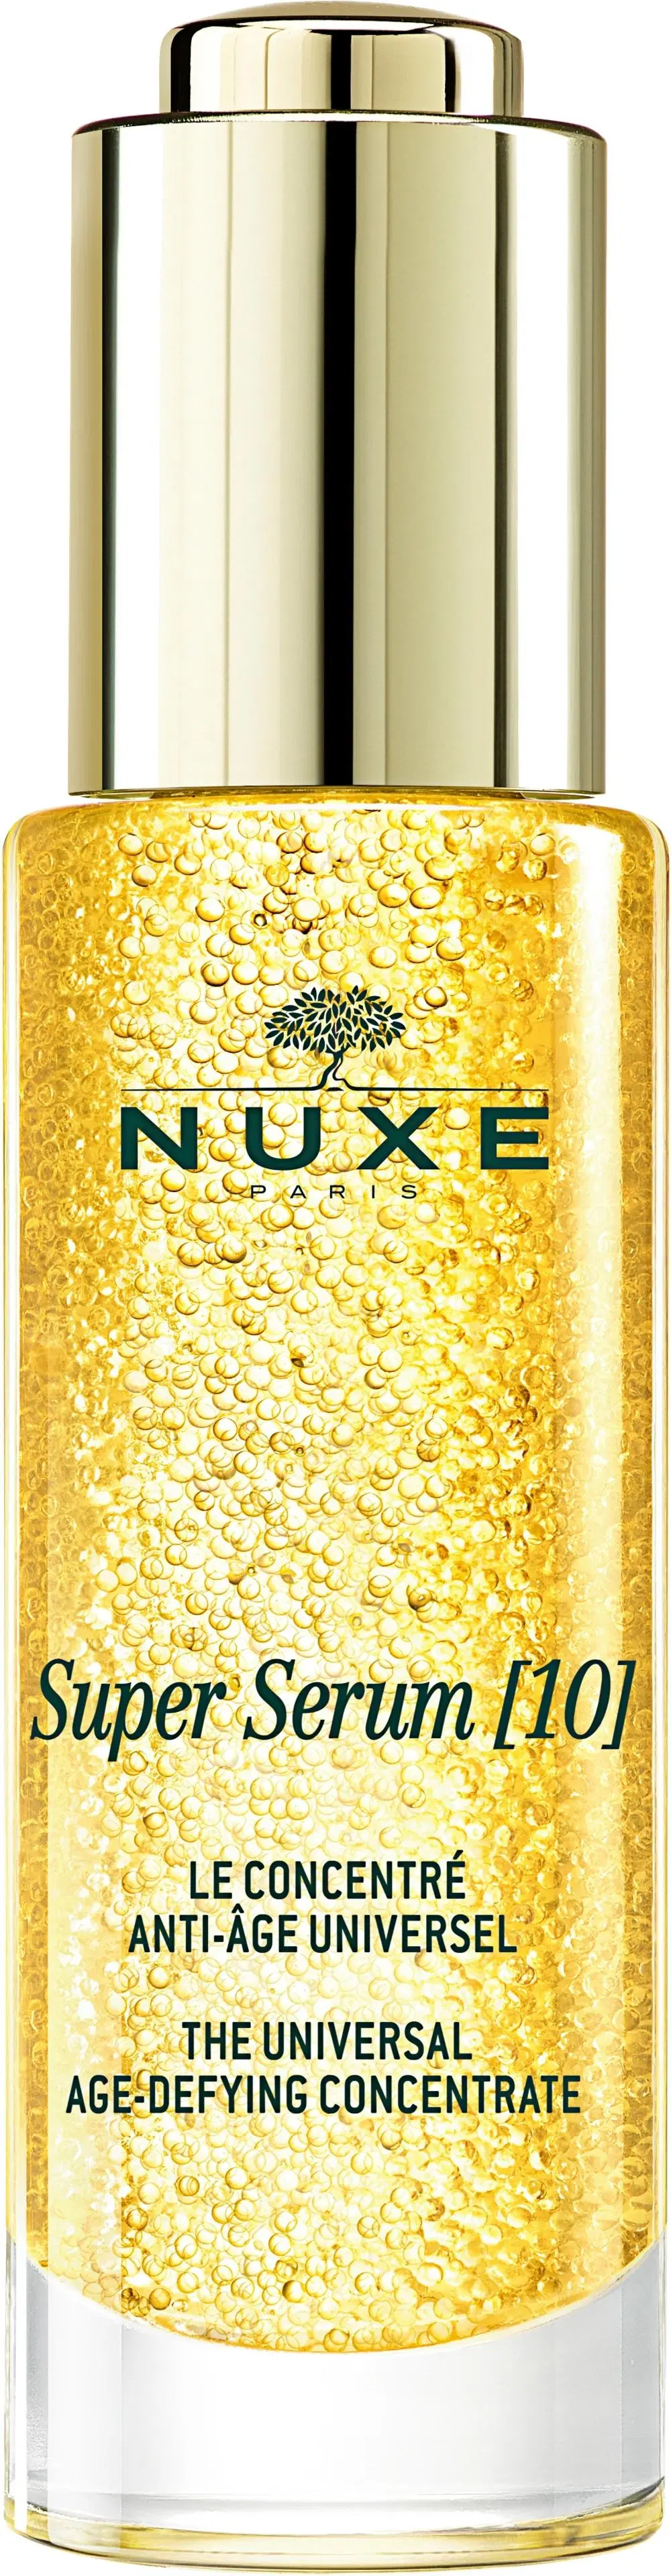 NUXE Super Serum [10] The Universal Age-Defying Concentrate kasvoseerumi 30 ml